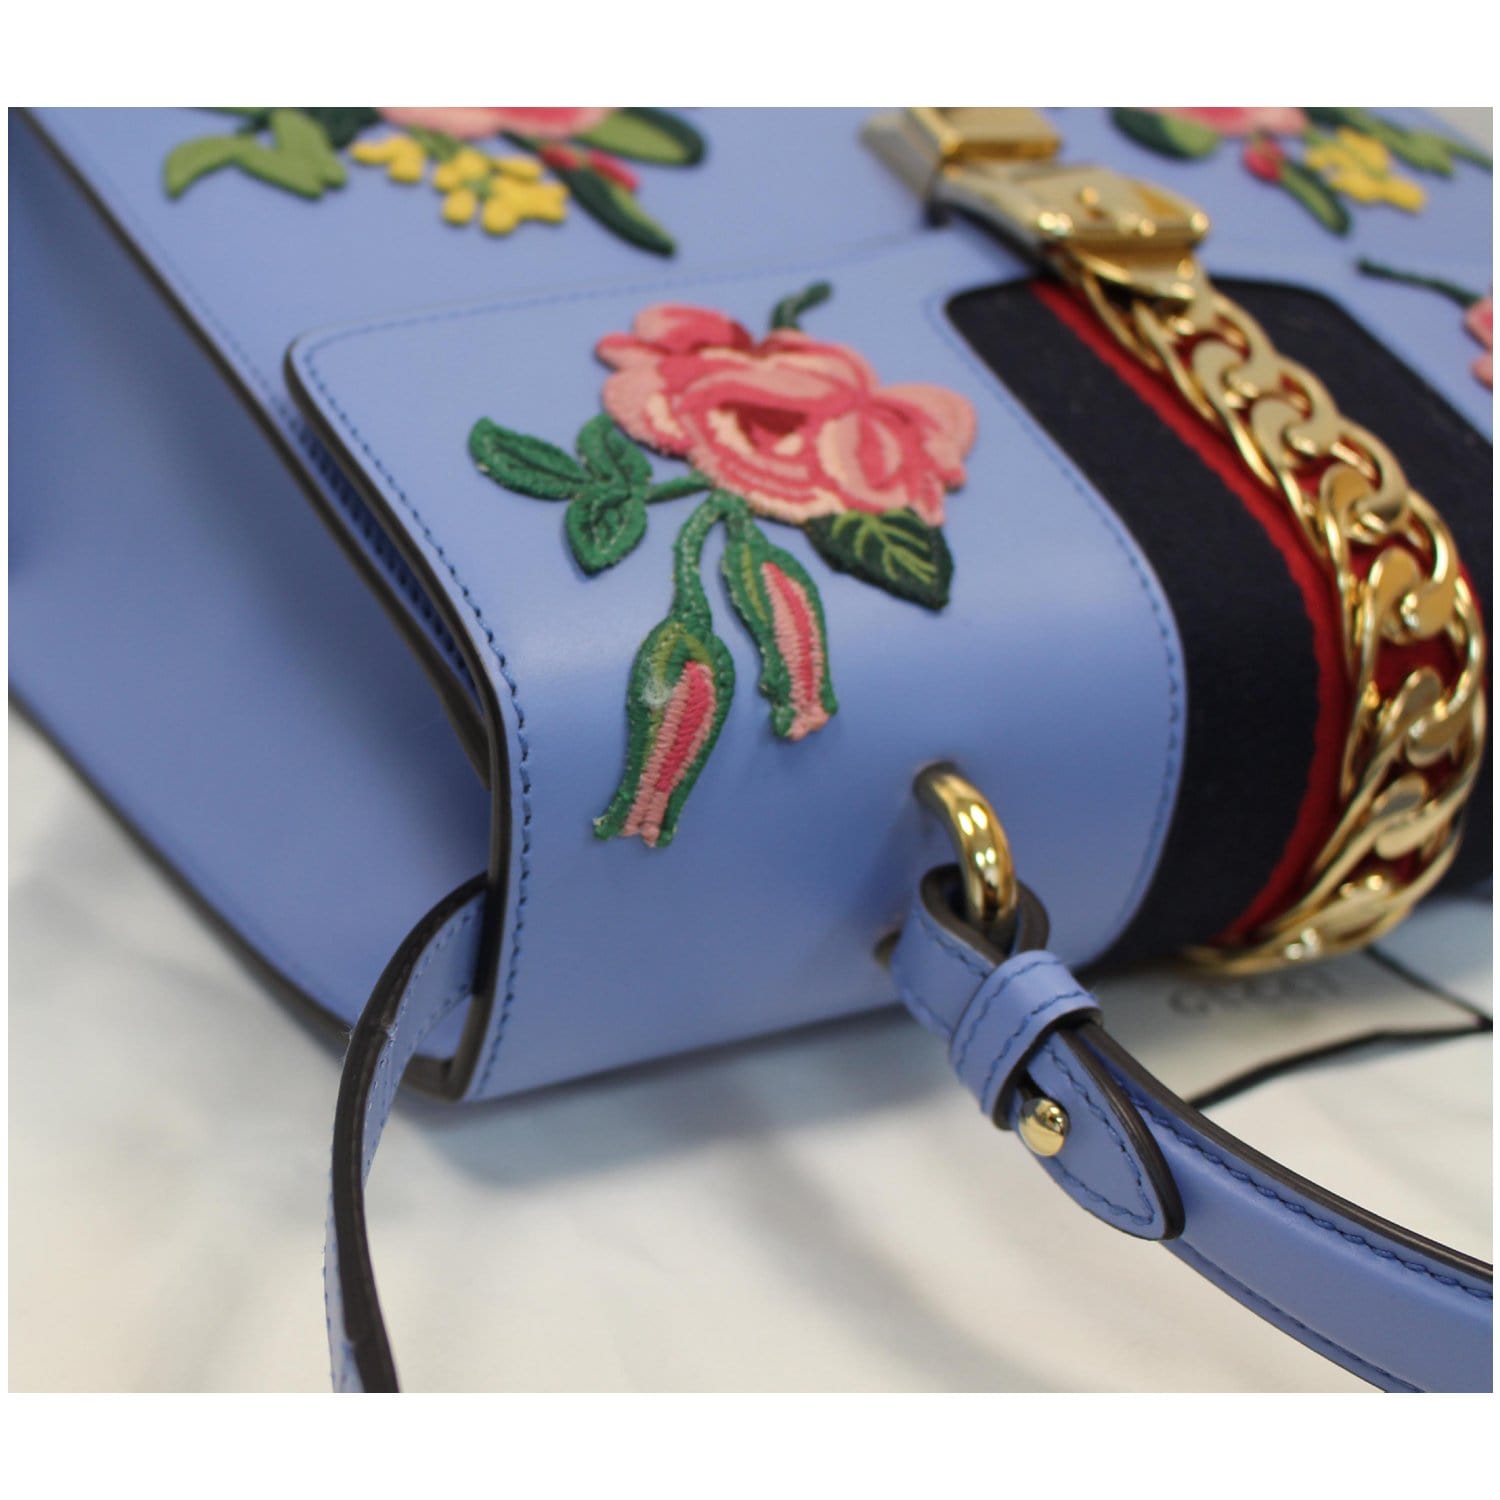 GUCCI Sylvie Embroidered Leather Medium Top Handle Bag Blue 431665 - 1